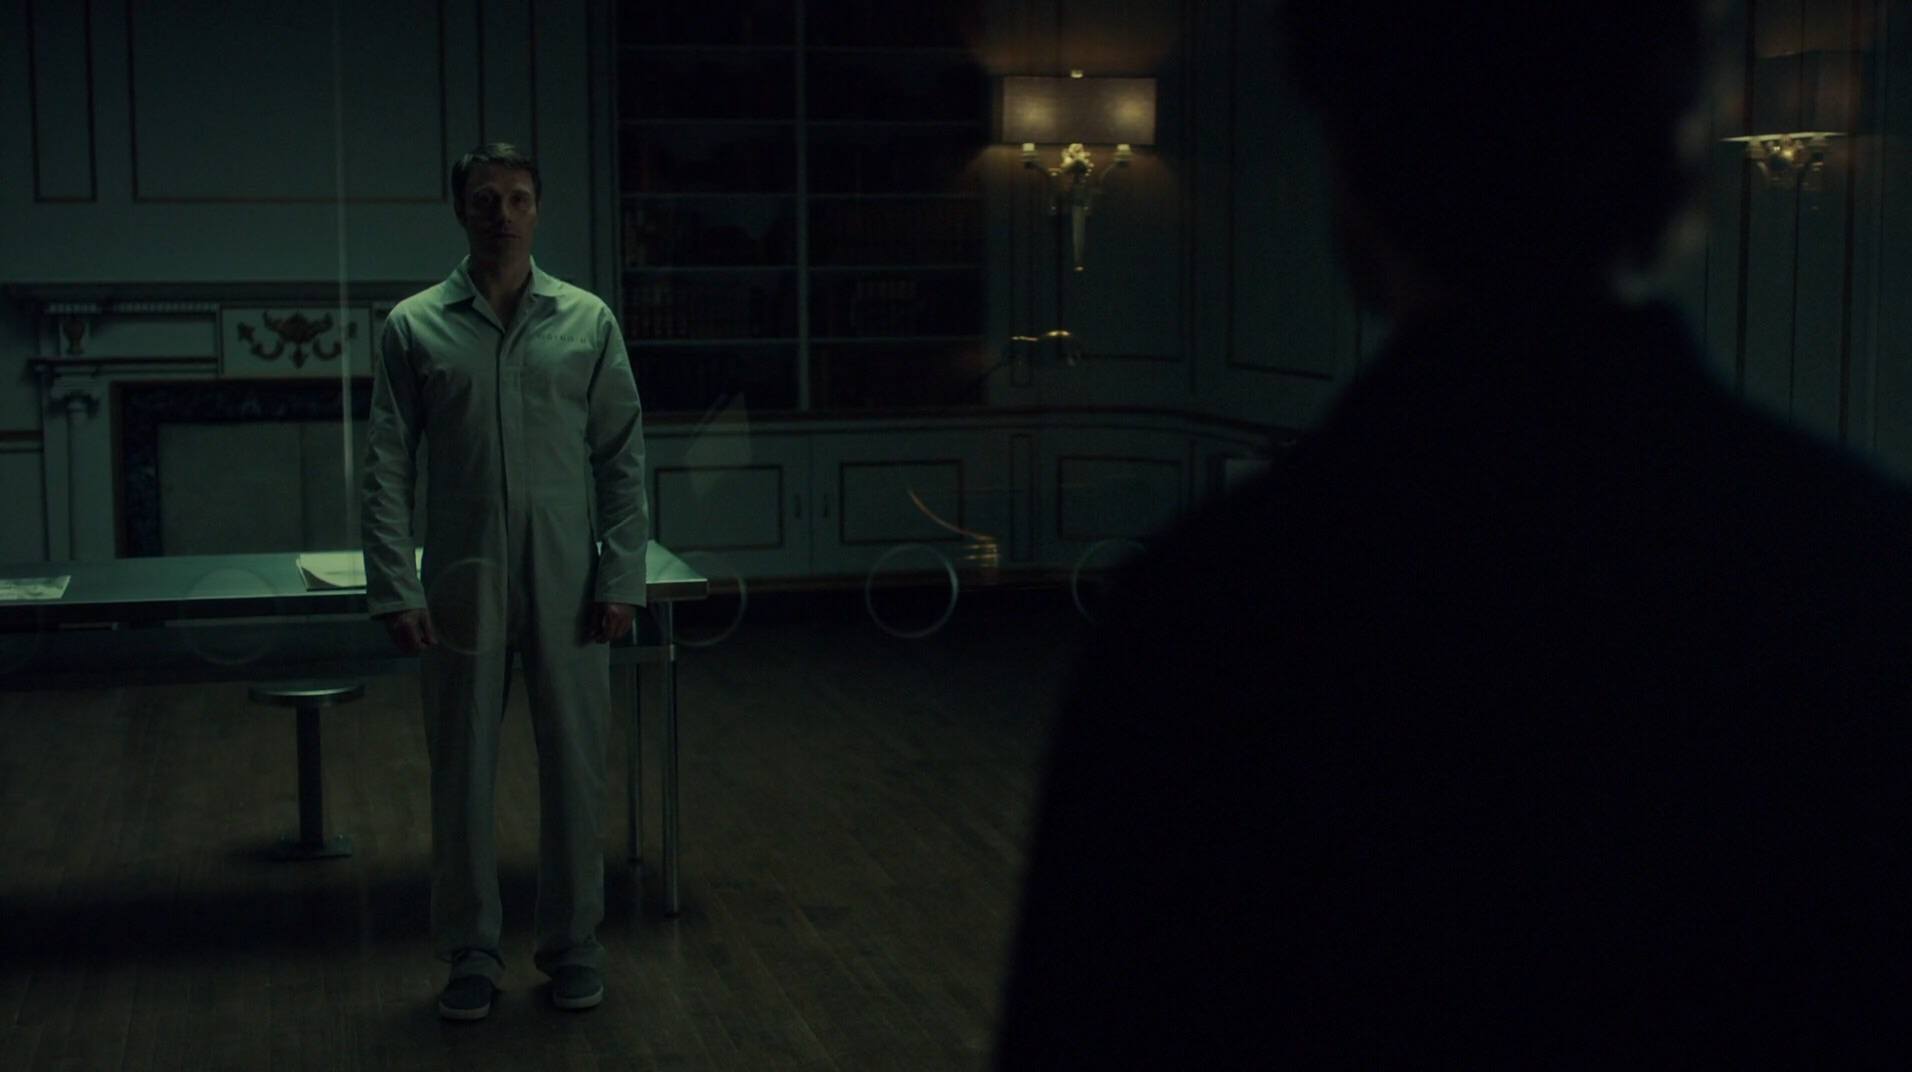 The Most Important Stories Told on Hannibal Were the Ones it Didn’t Tell